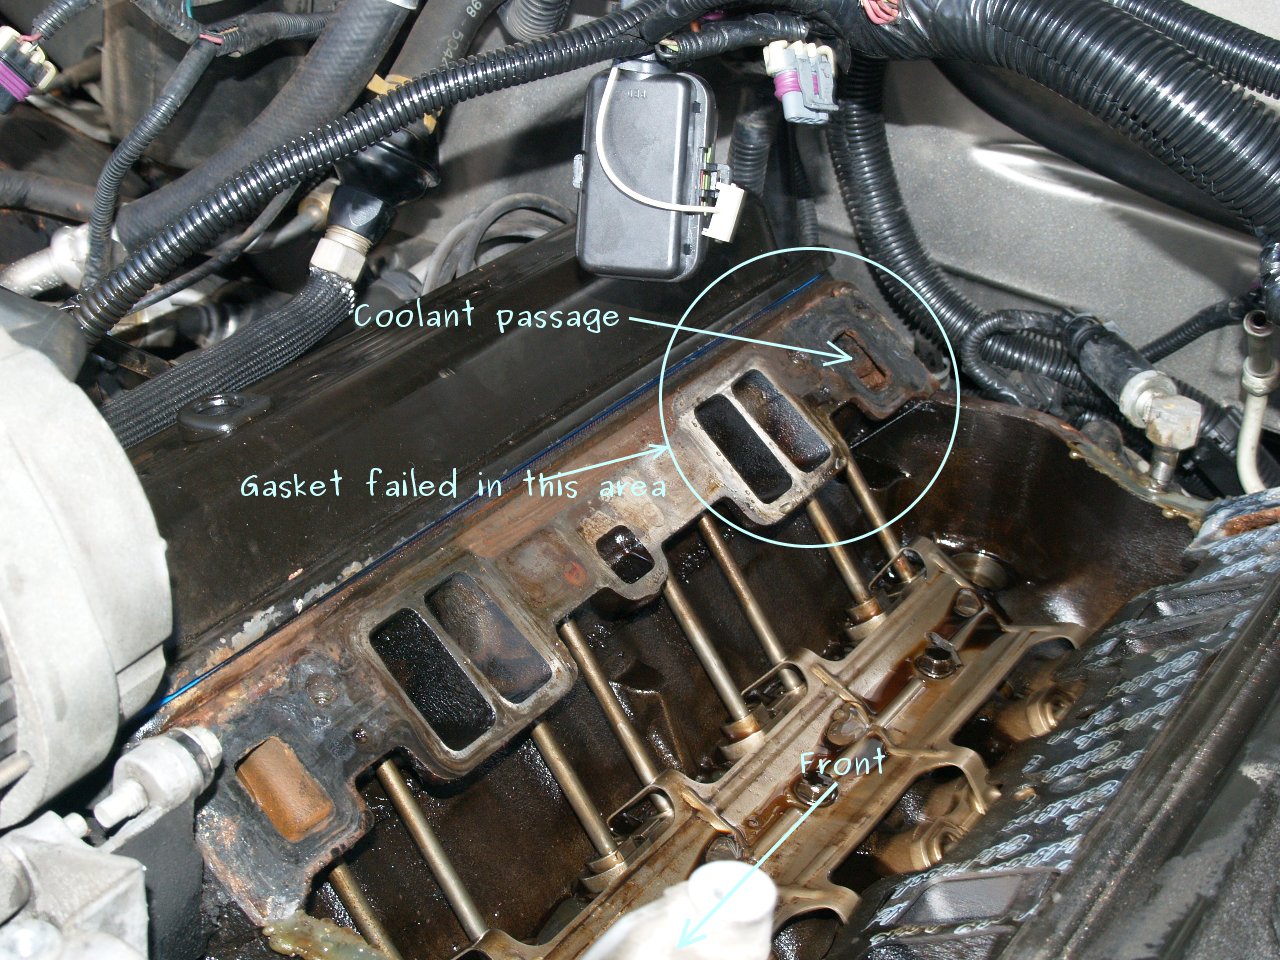 See B20E0 in engine